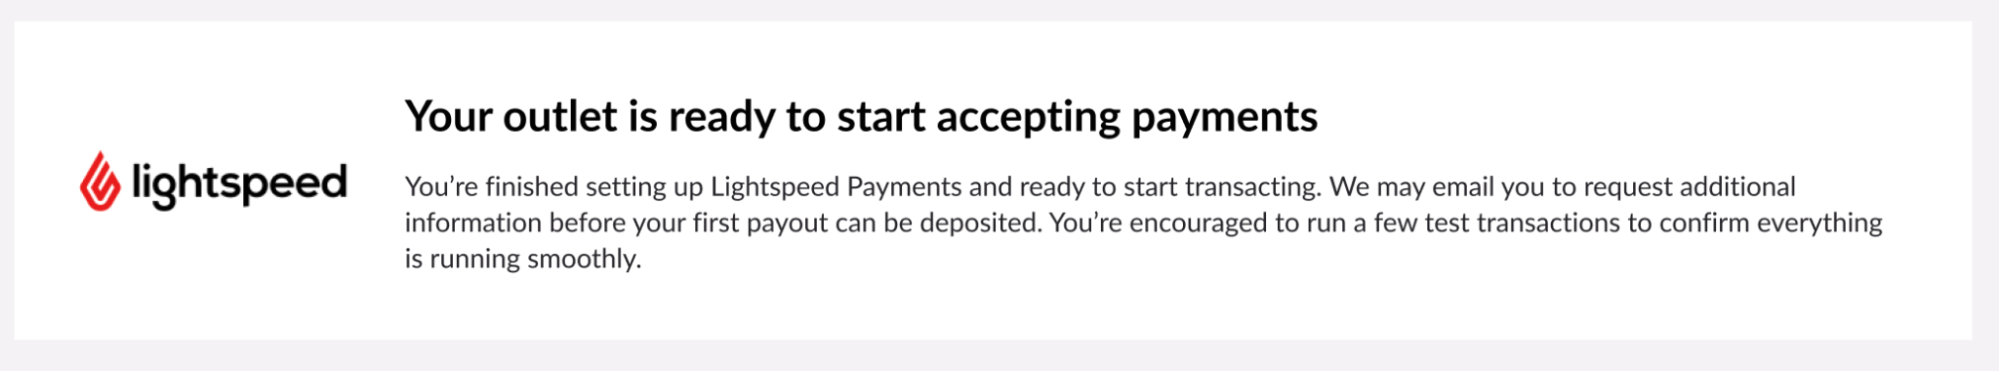 LS-Pay-Application-Ready-Accept-Payments.png